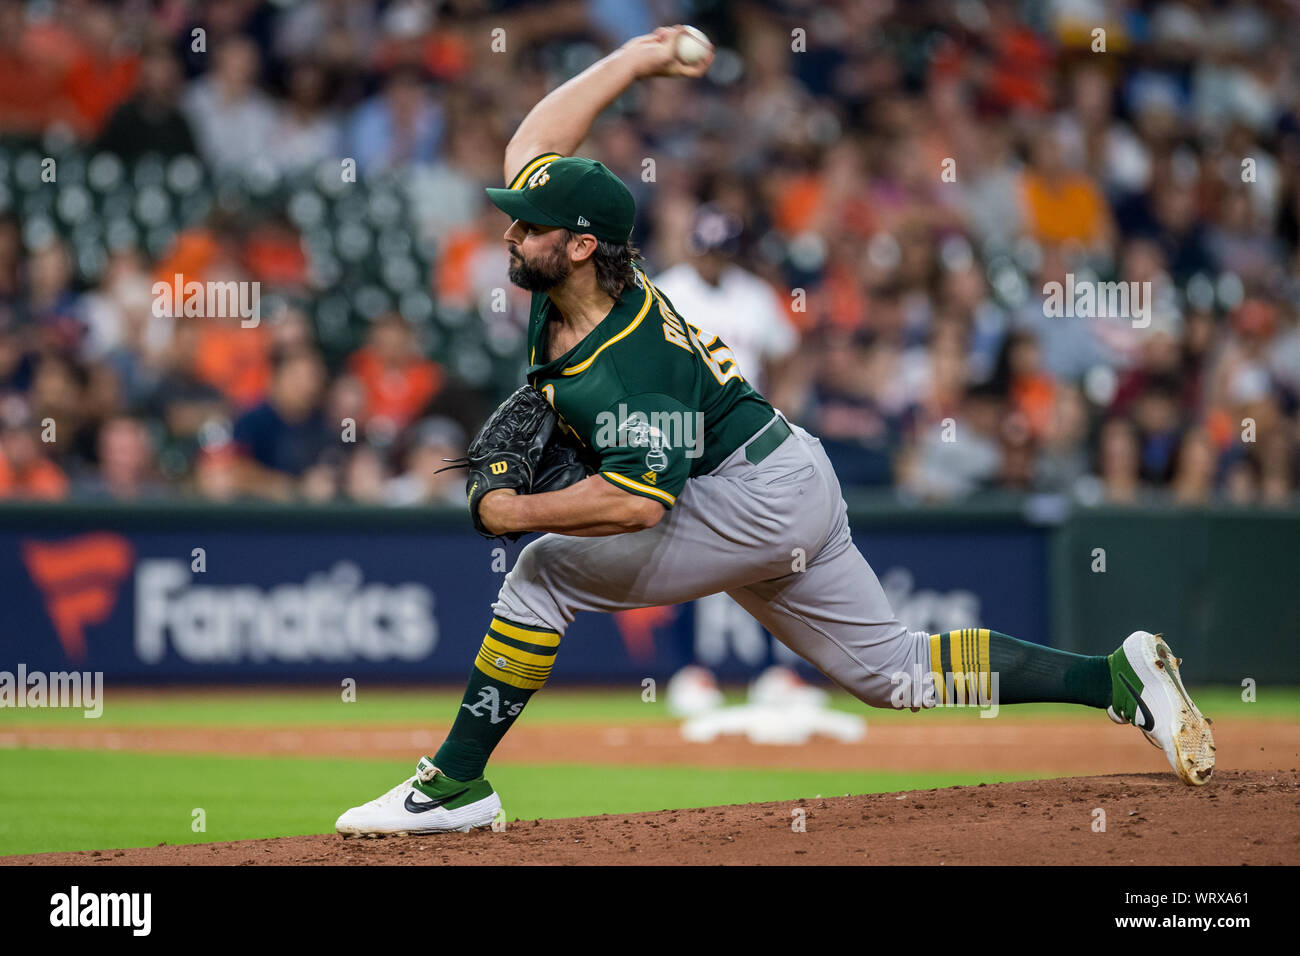 Houston, United States. 10th Sep, 2019. Oakland Athletics starting pitcher Tanner Roark pitches against the Houston Astros in the 1st inning at Minute Maid Park in Houston on Tuesday, September 10, 2019. Photo by Trask Smith/UPI Credit: UPI/Alamy Live News Stock Photo